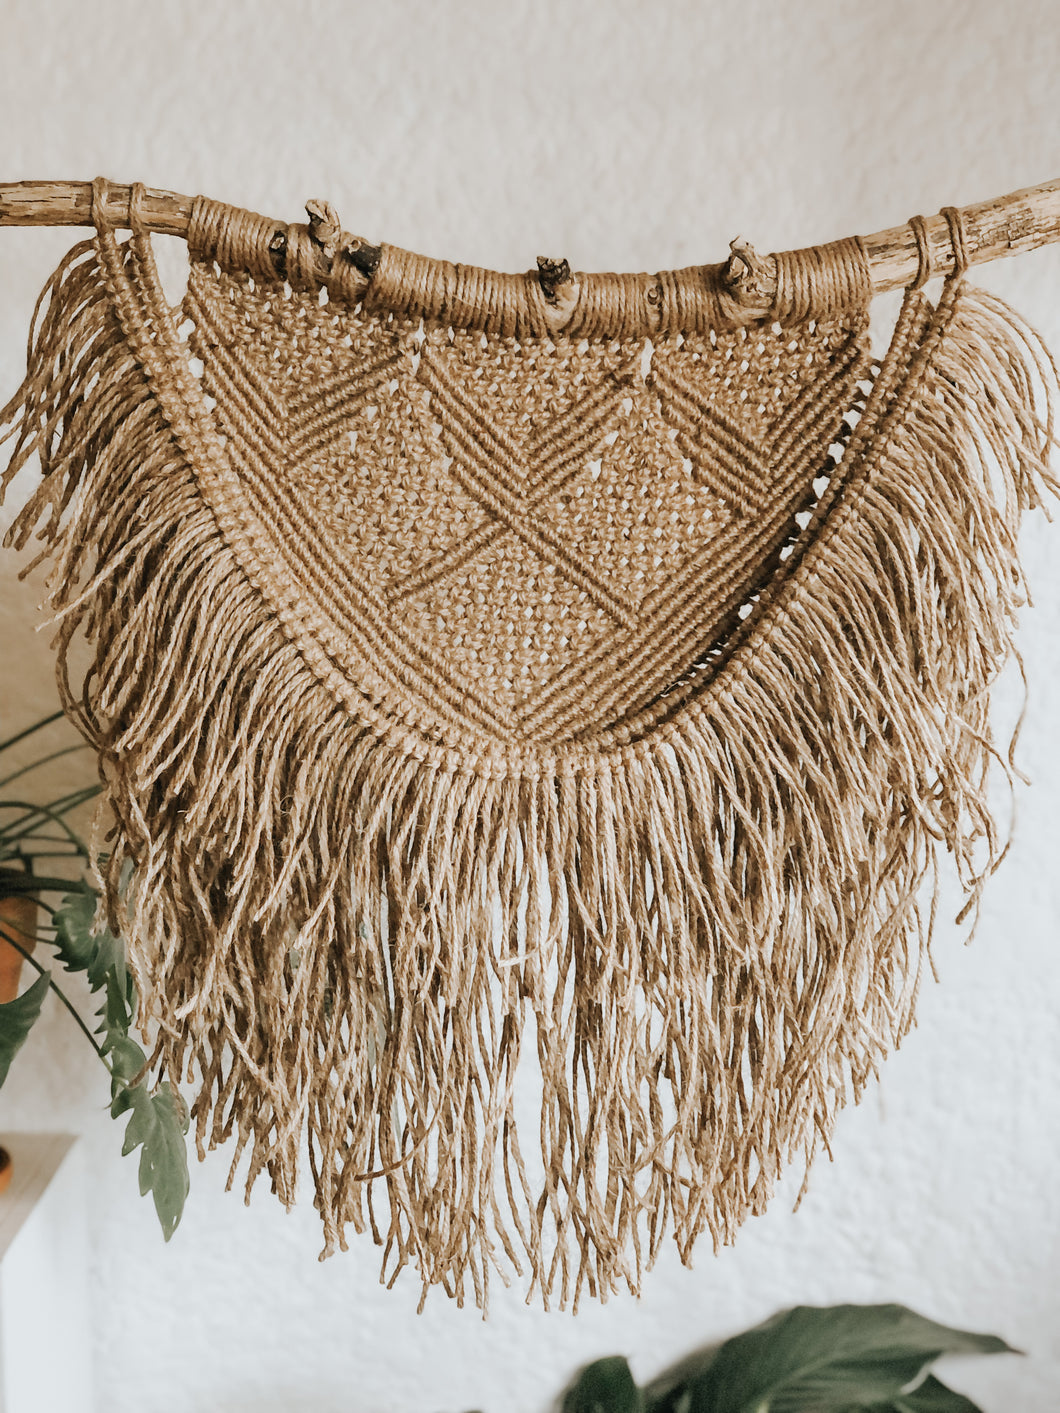 Decorate your space with this safari/rock inspired wall hanging. Made with jute twine on a treated piece of driftwood foraged in Cape Town. It's the perfect addition to an entrance hallway, a bedroom or dinning room area. Hang it in a well lit area surround with some house plants.